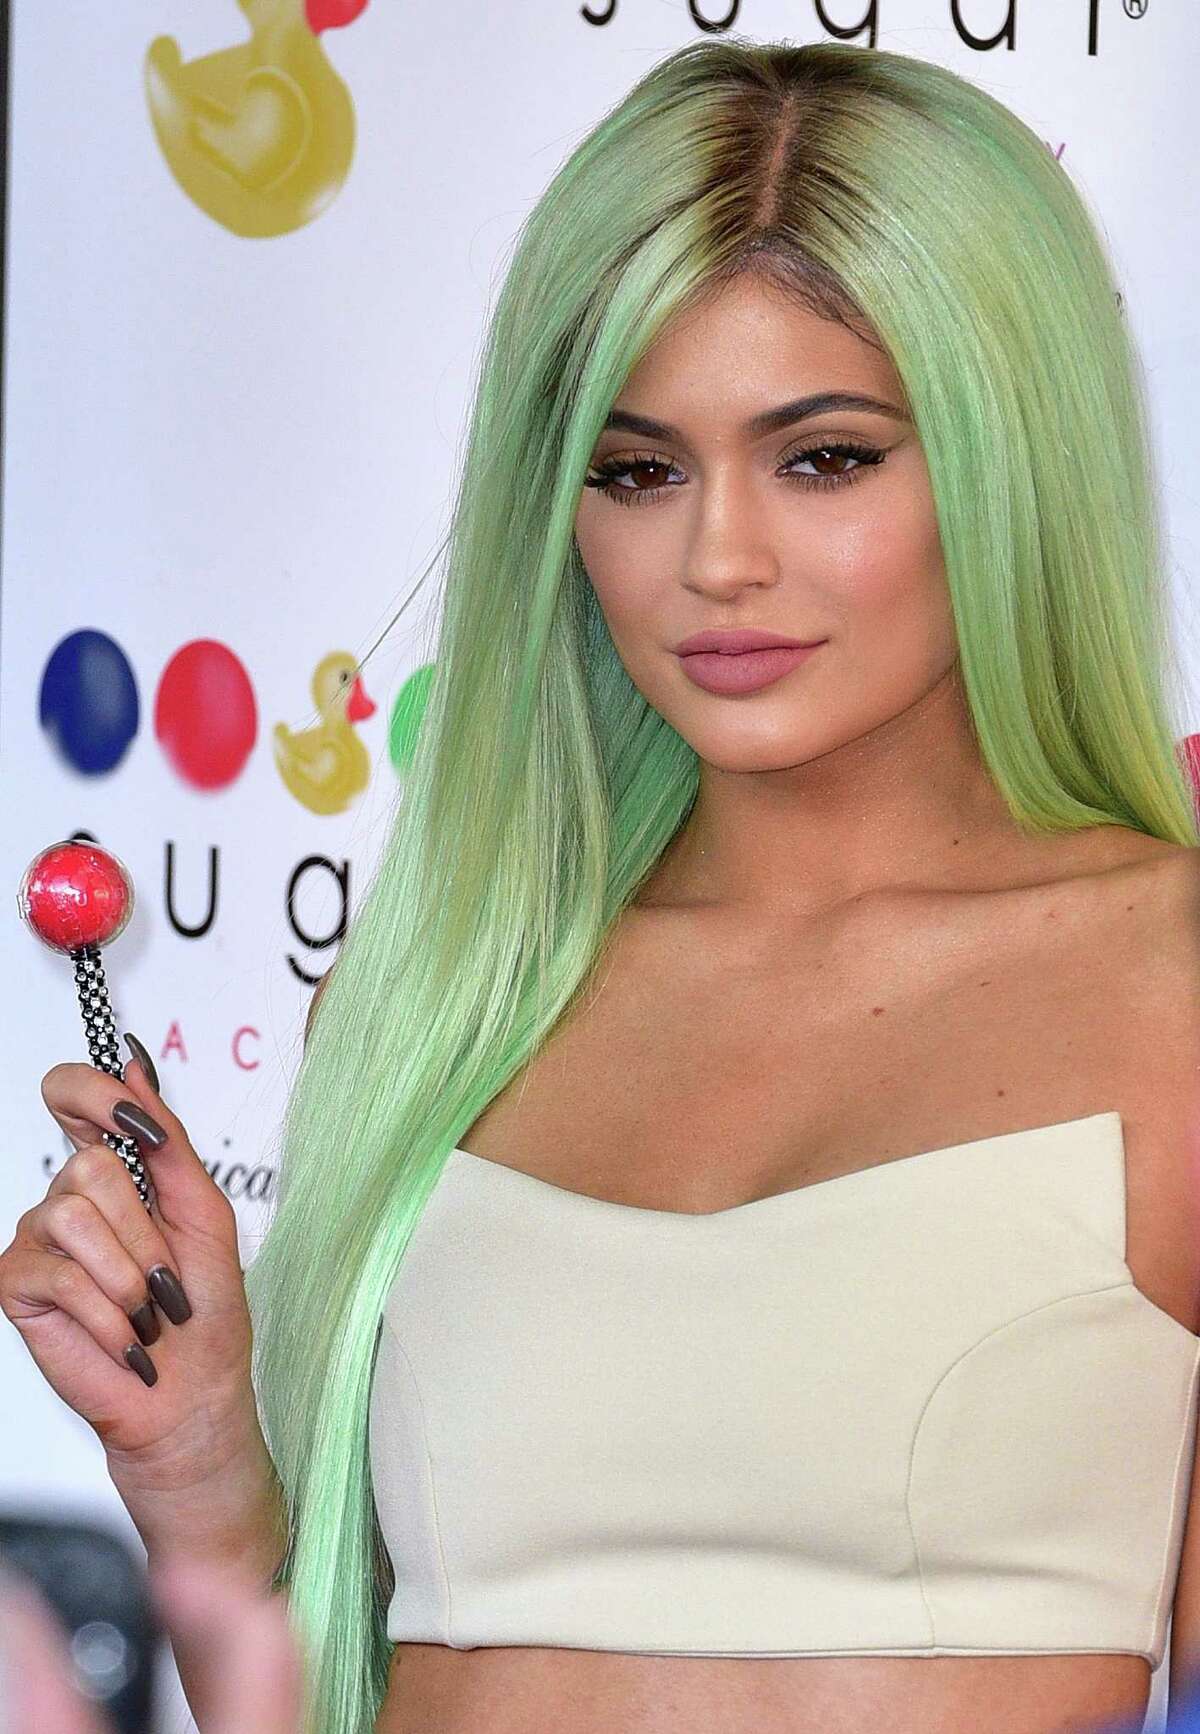 Kylie Jenner Posts Picture Of A Scar On Her Leg On Instagram 1930